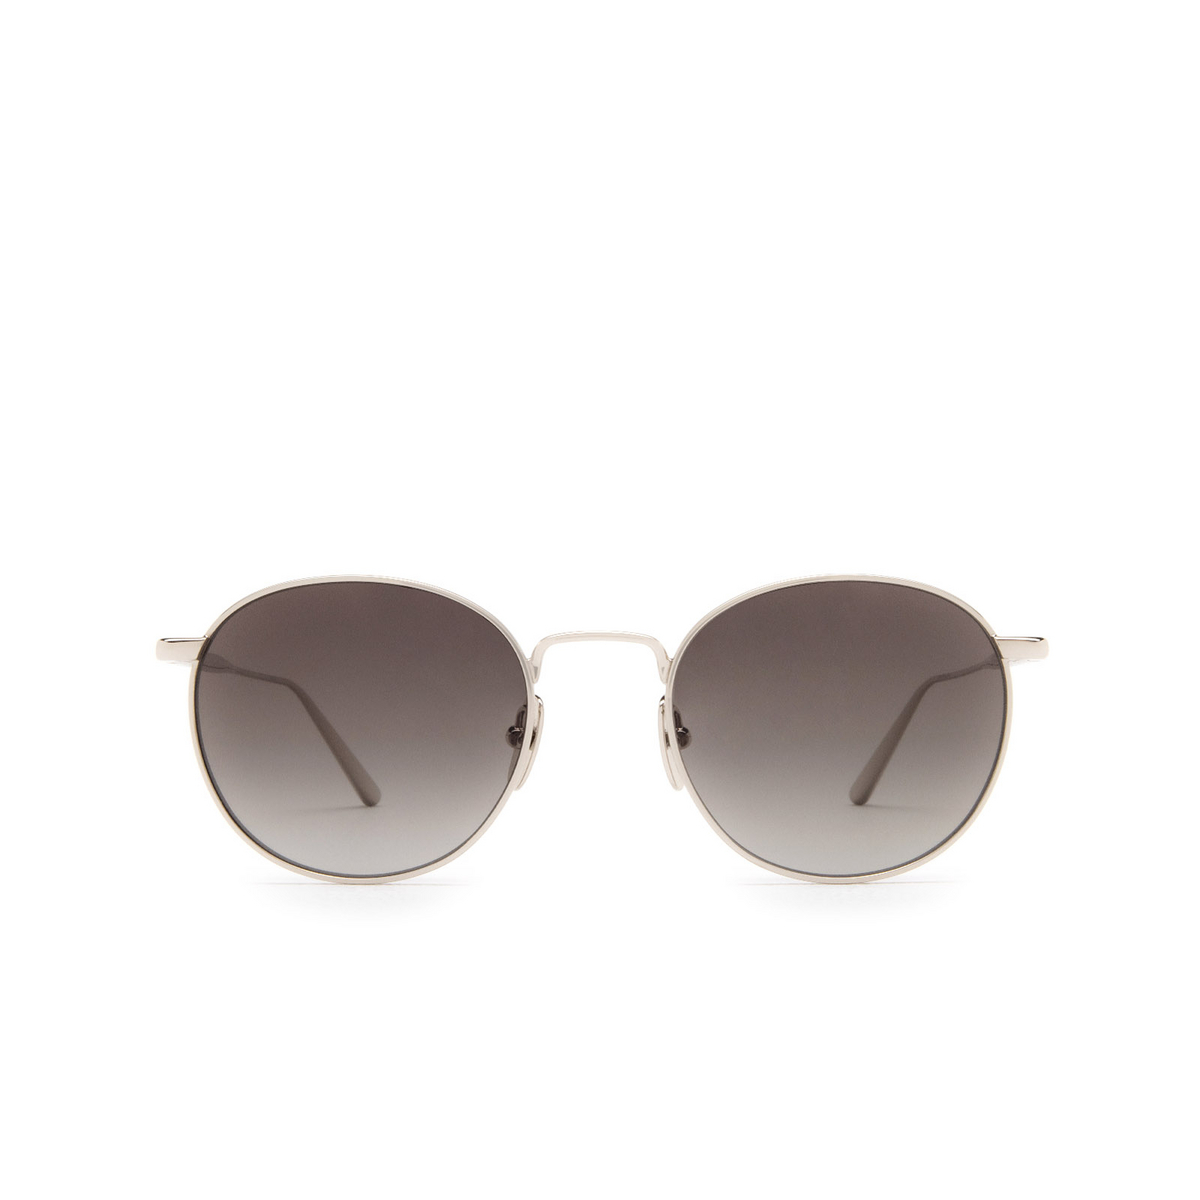 Chimi ROUND Sunglasses GREY - front view